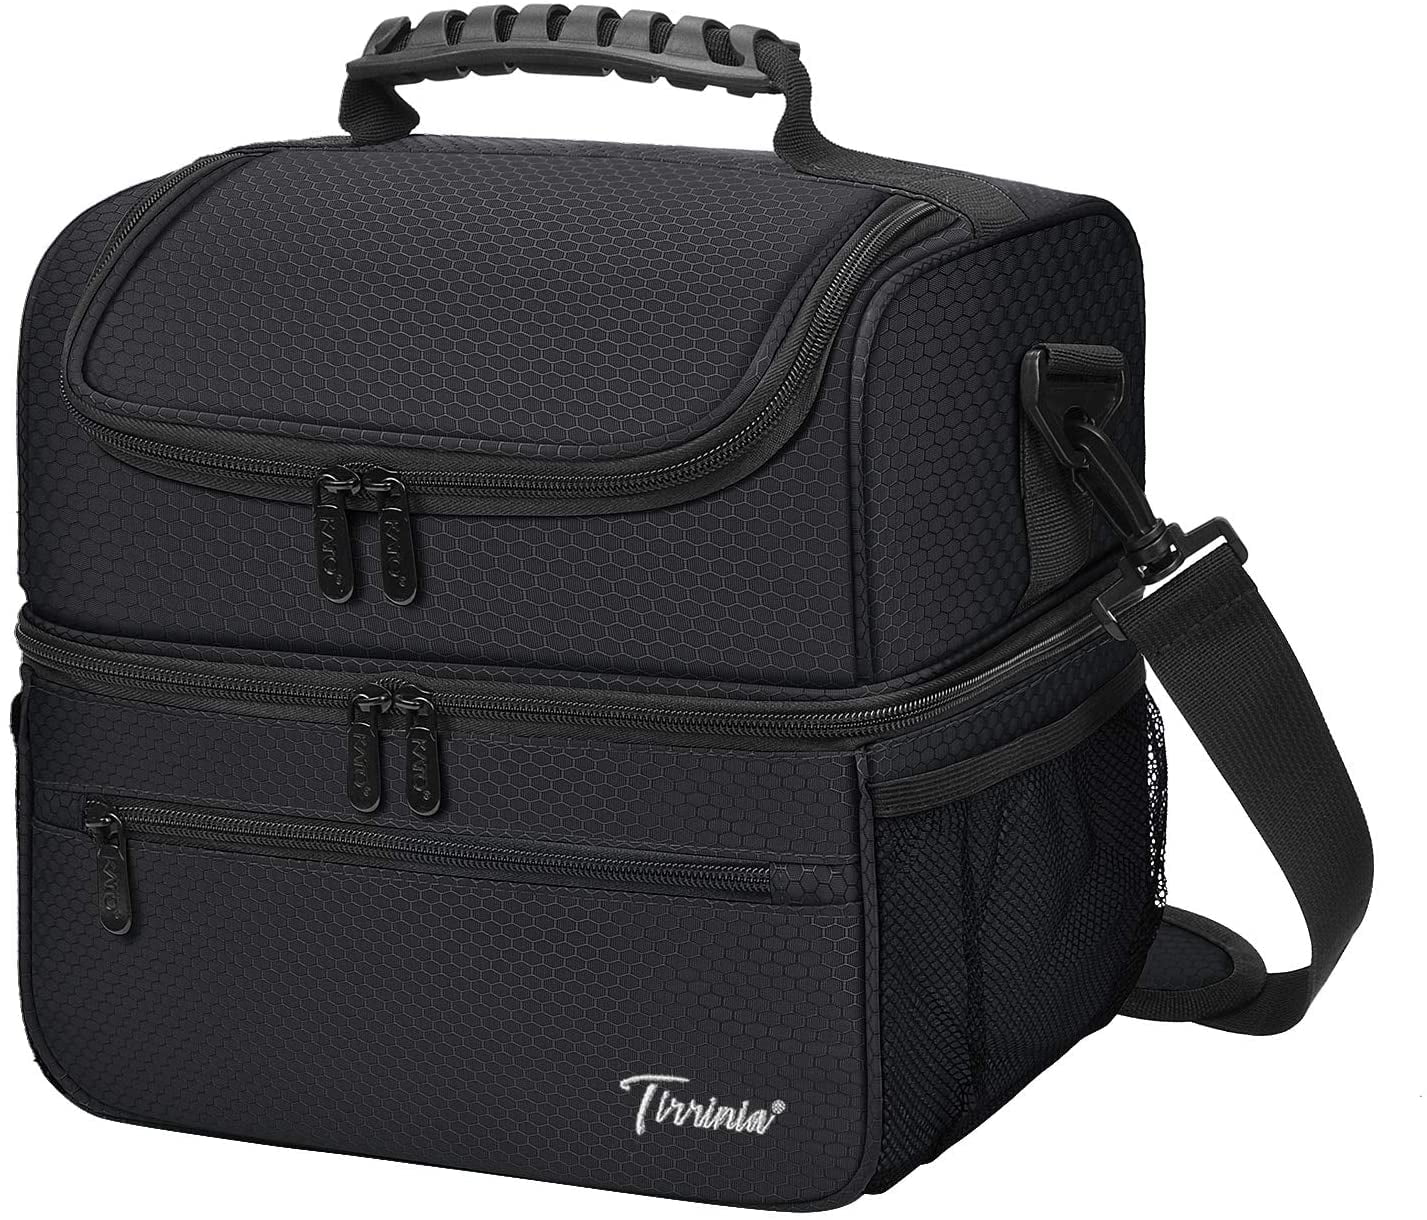 Large Insulated Lunch Box For Men Lunchbox with 2 Reusab... Insulated Lunch Bag 